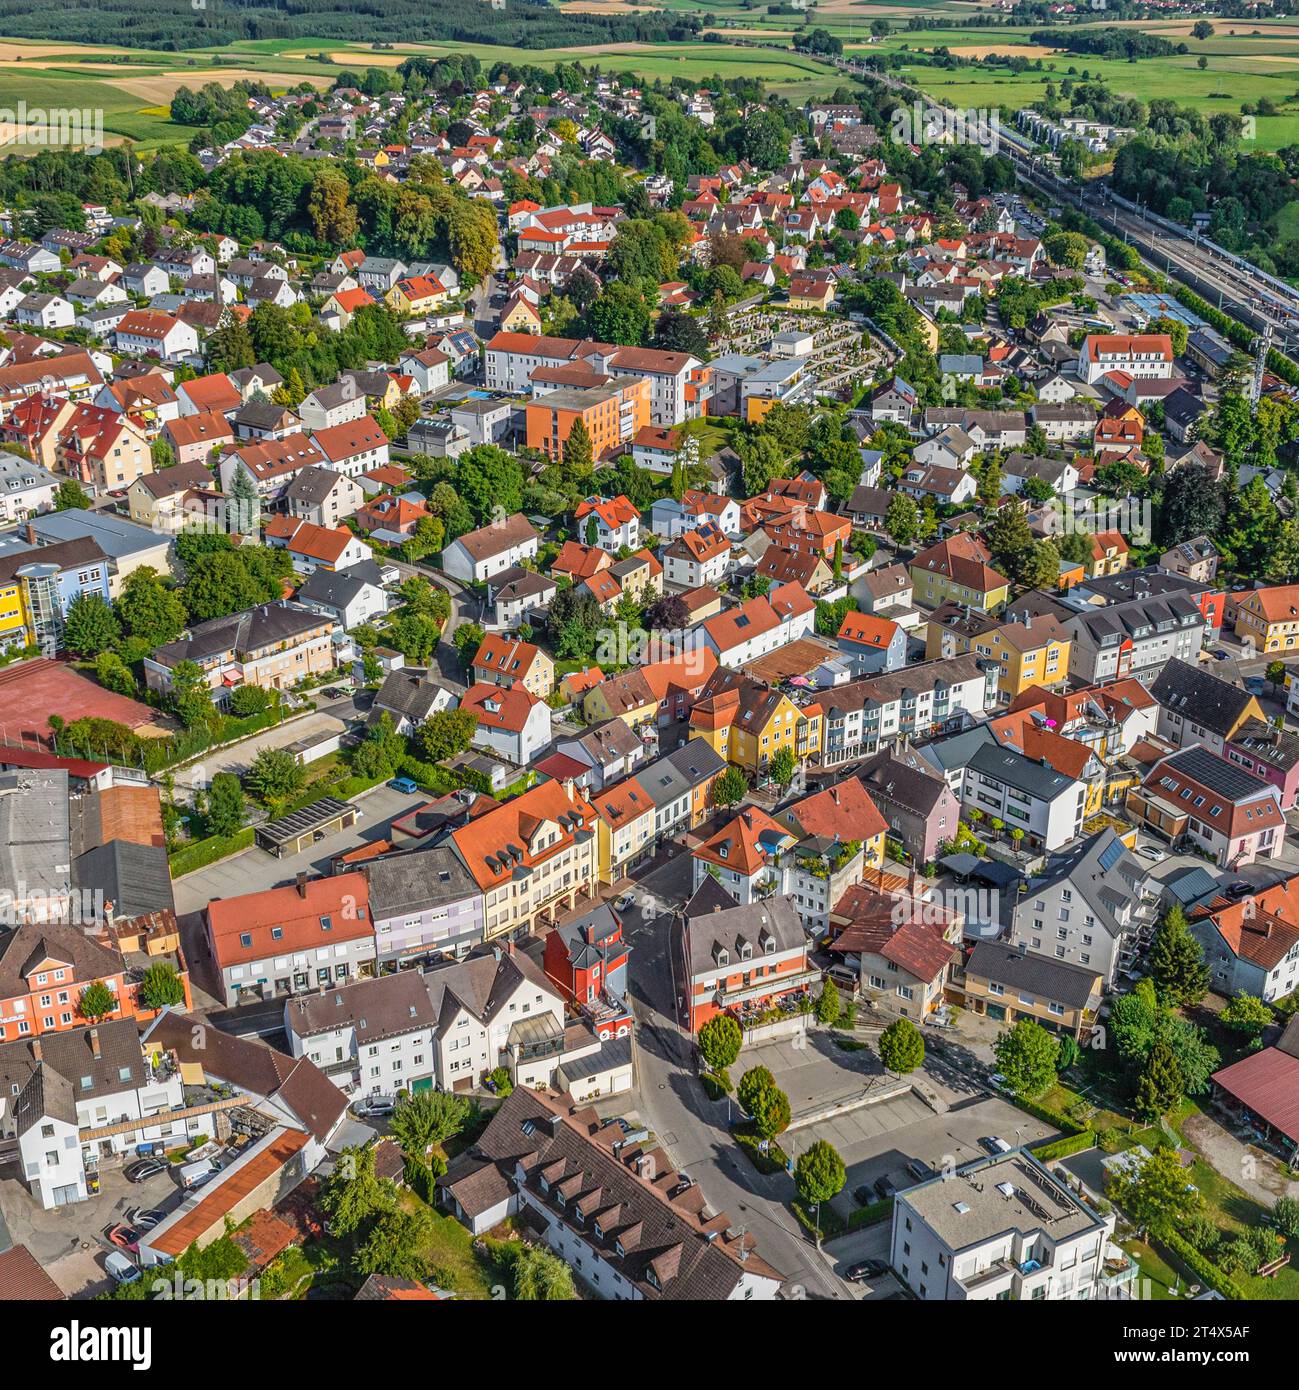 The market community of Mering in swabia from above Stock Photo